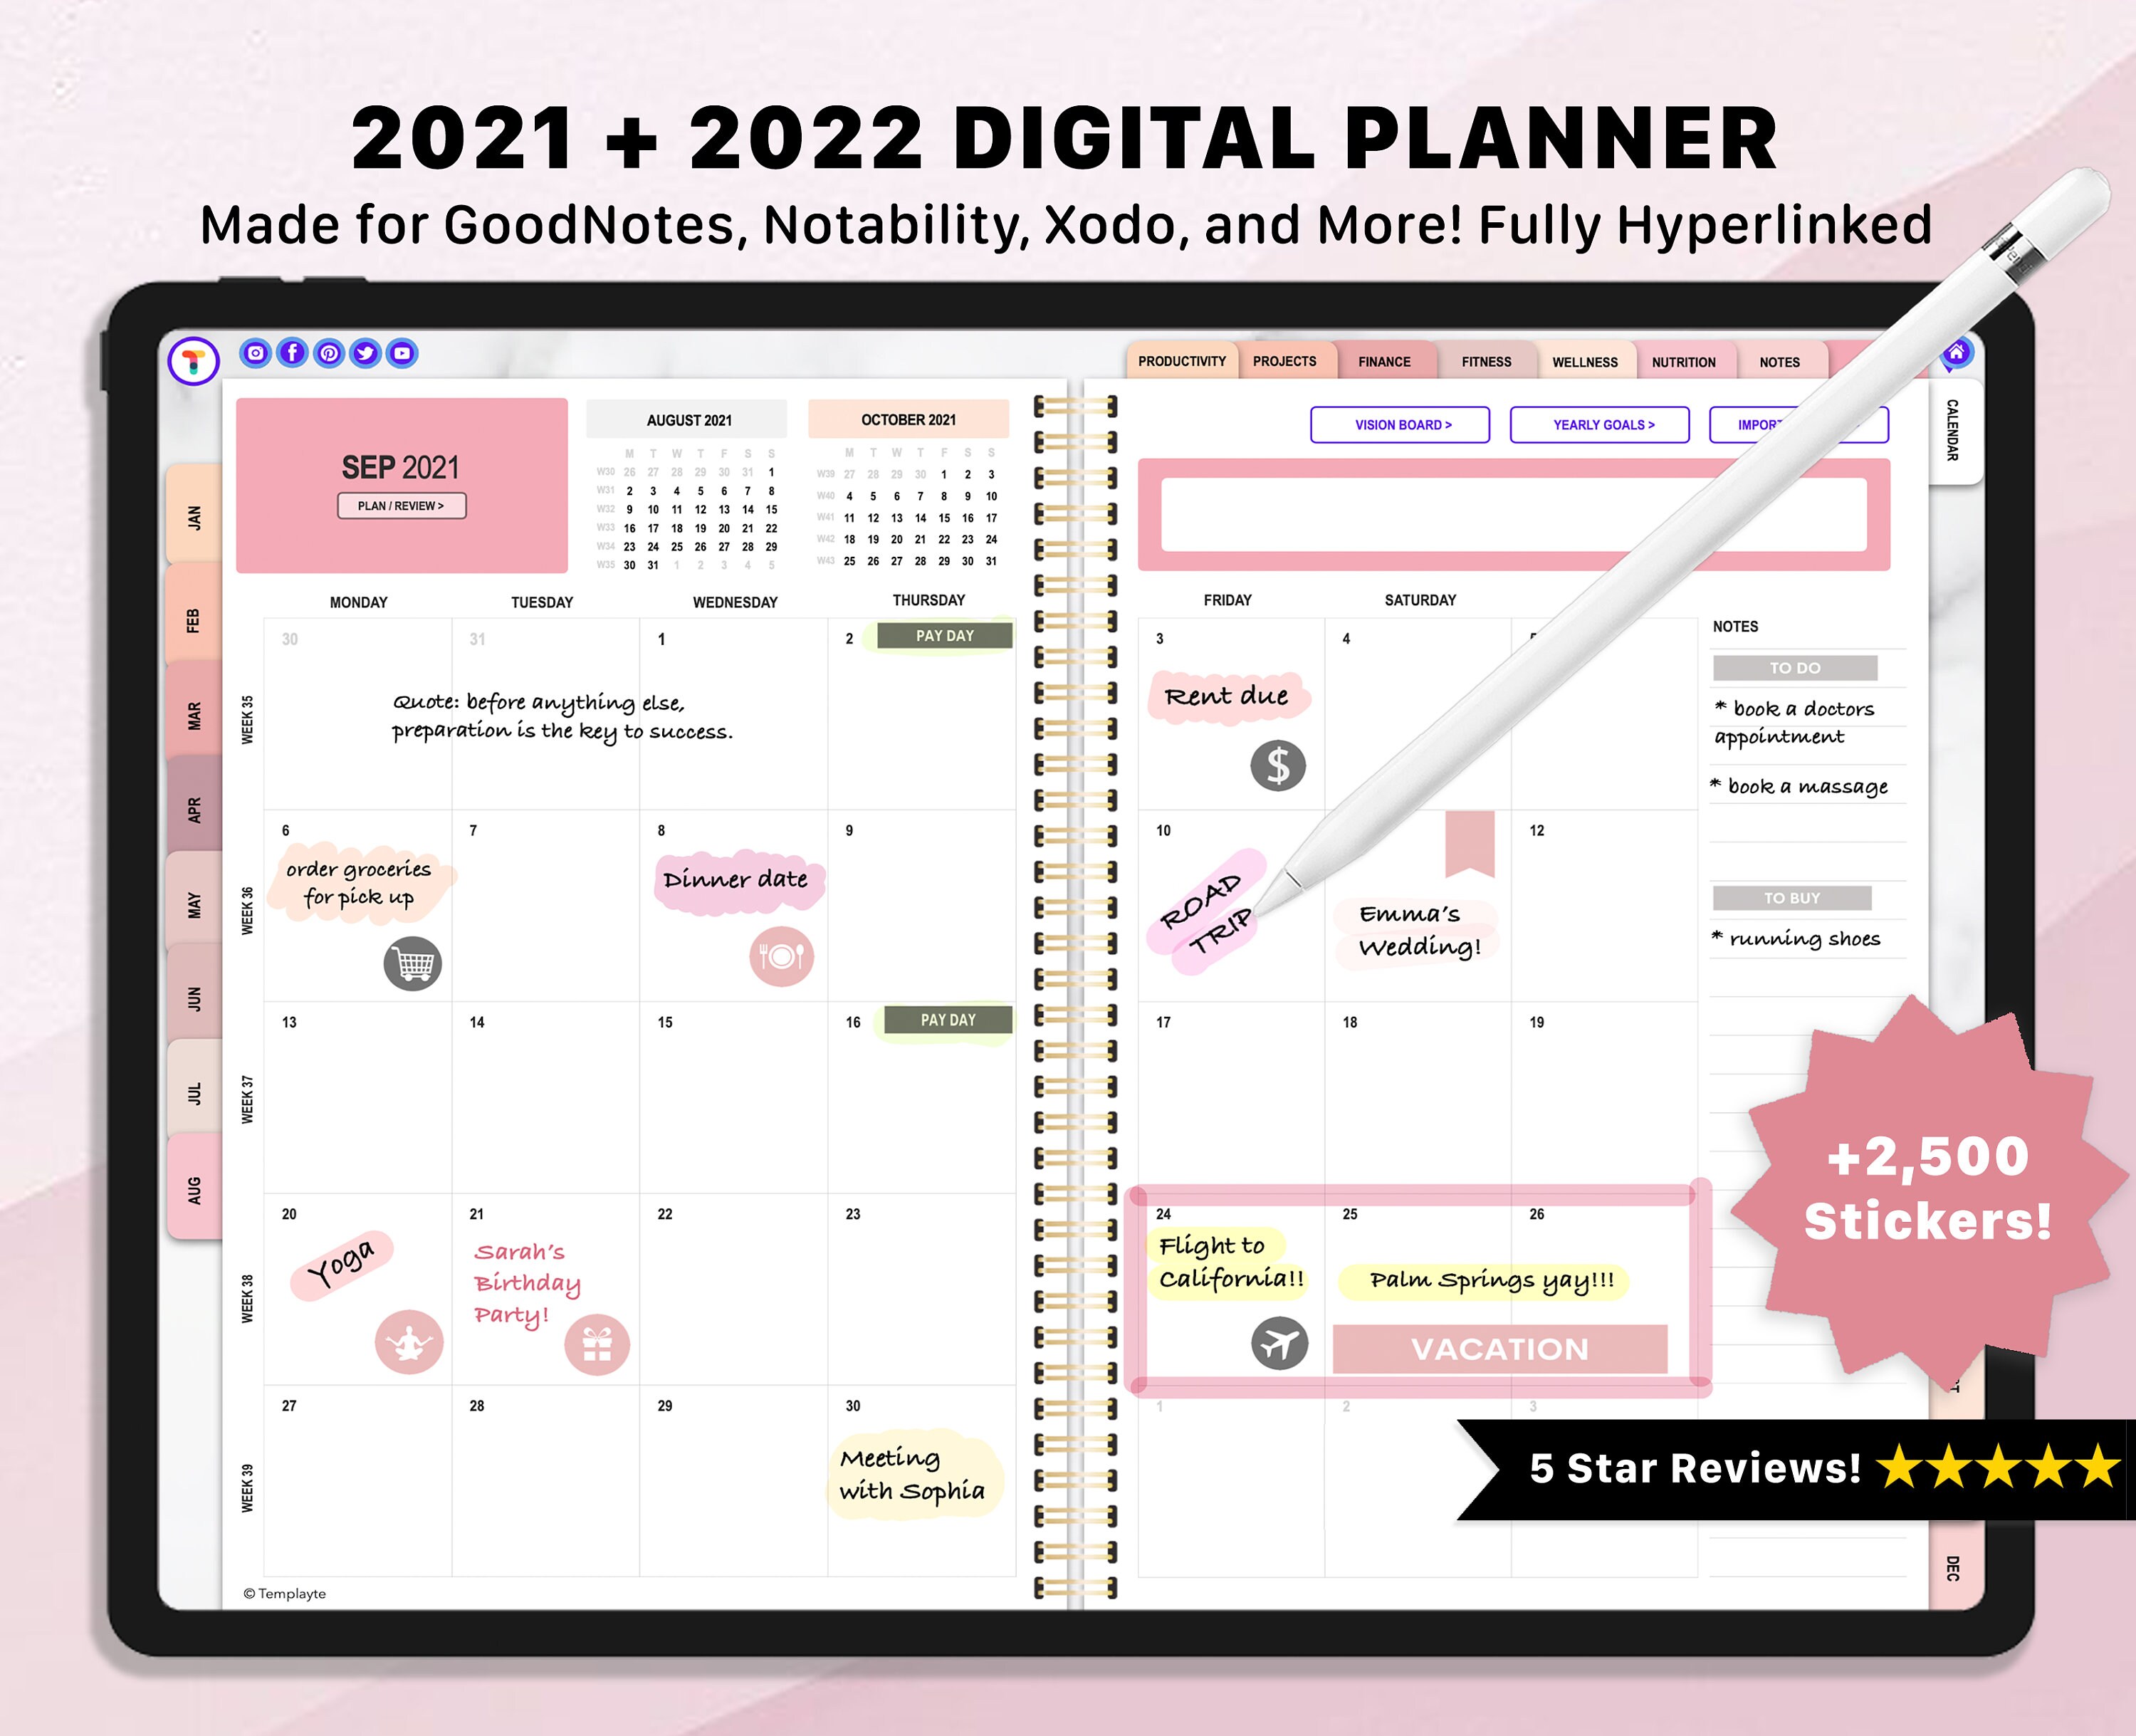 goodnotes planner templates free 2020